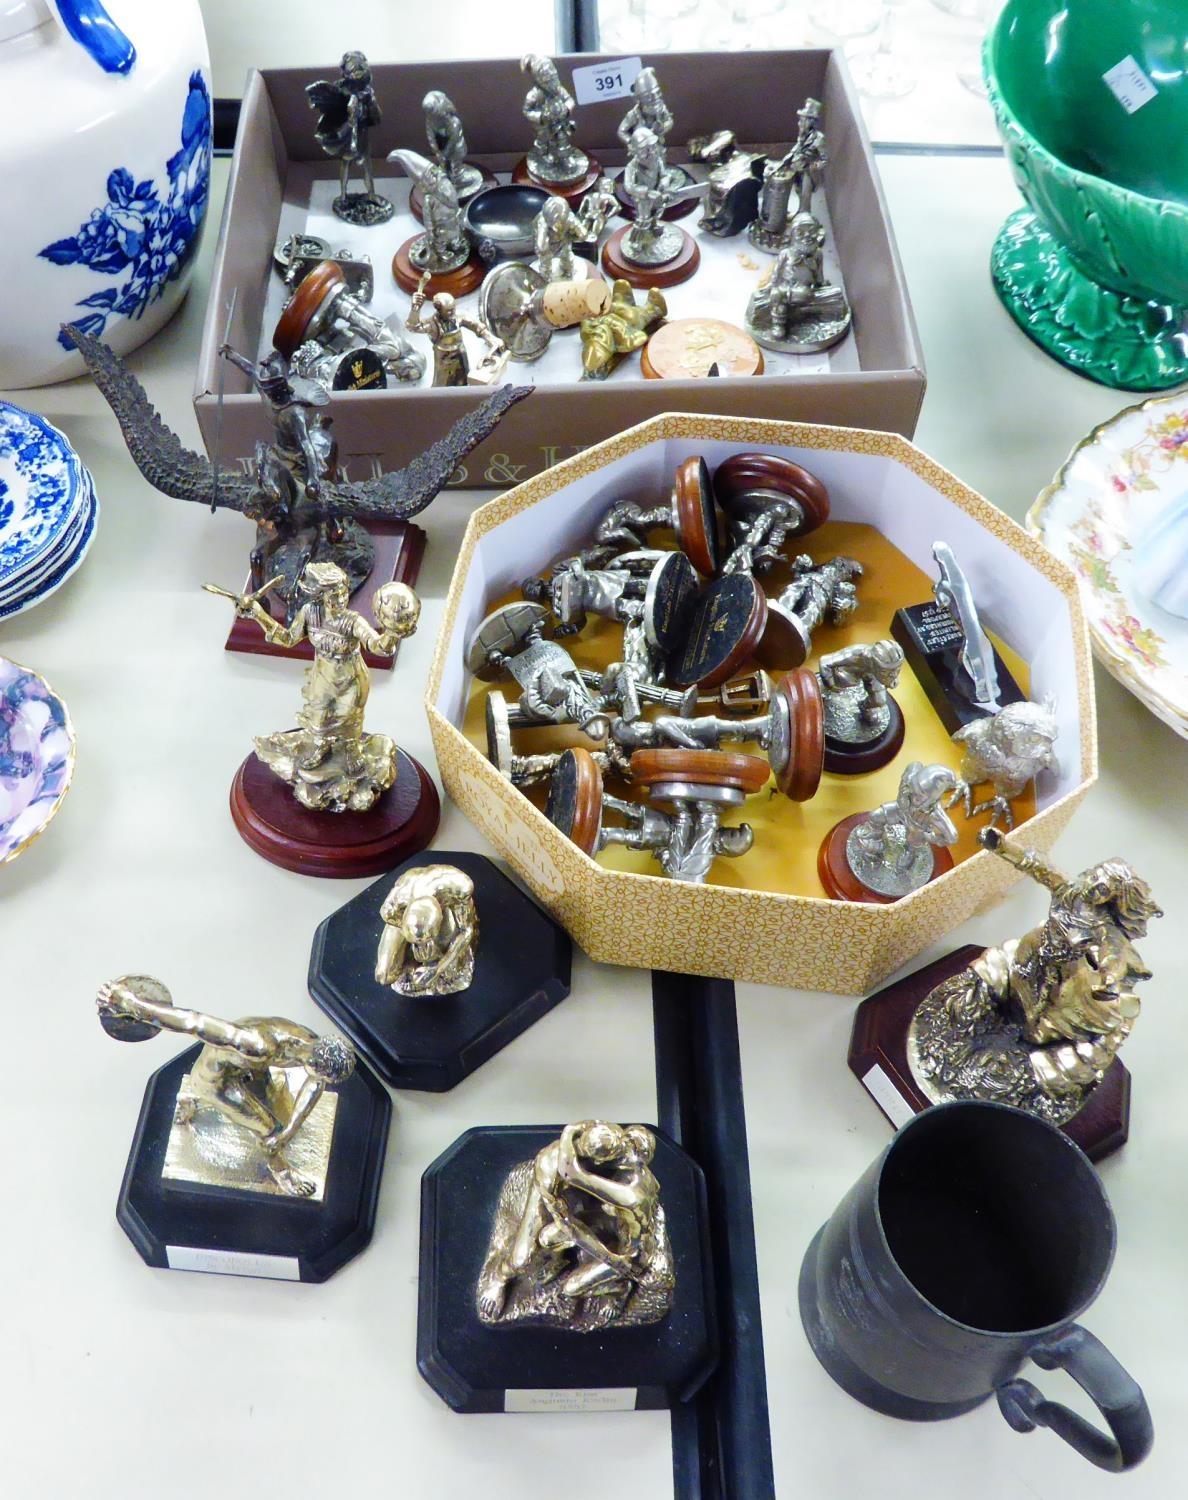 APPROXIMATELY 38 ITEMS OF MODERN COLD-CAST RESIN "ENGLISH MINIATURES" FIGURINES, A PLATED WINE